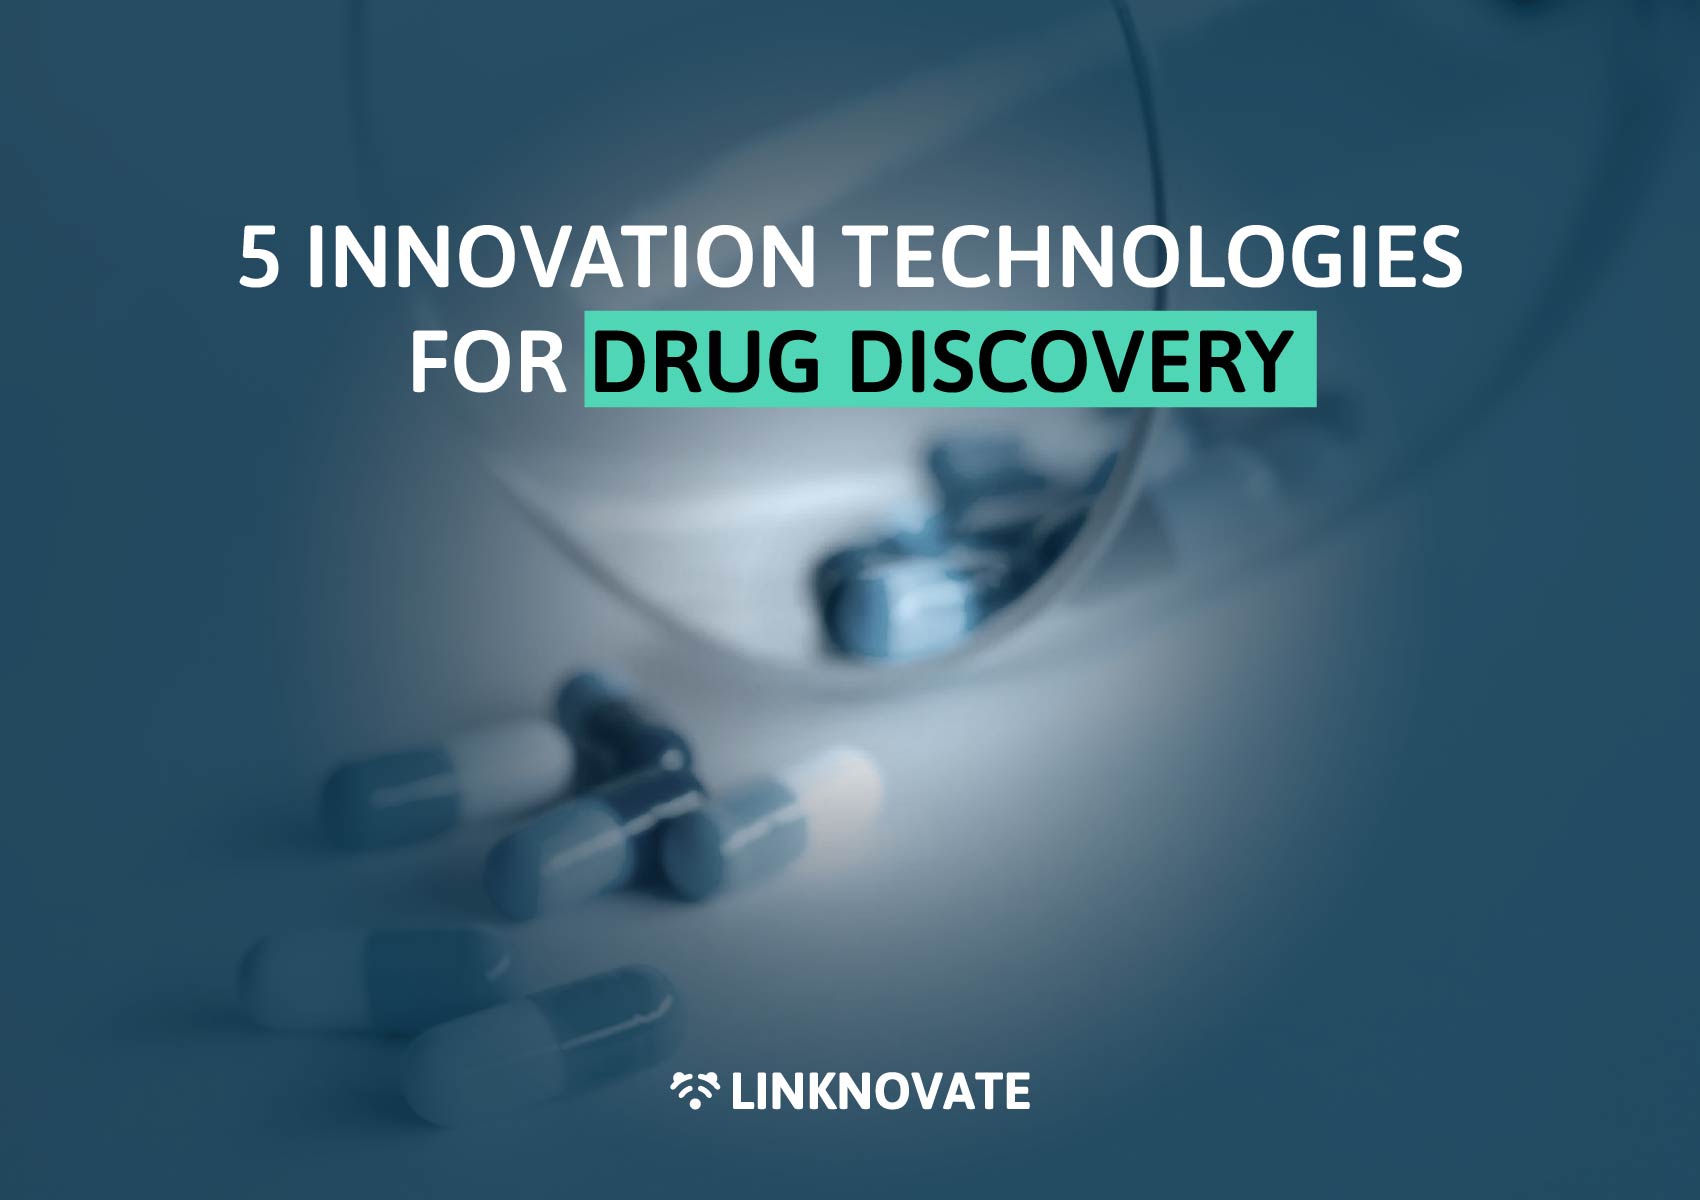 5 INNOVATION TECHNOLOGIES FOR DRUG DISCOVERY